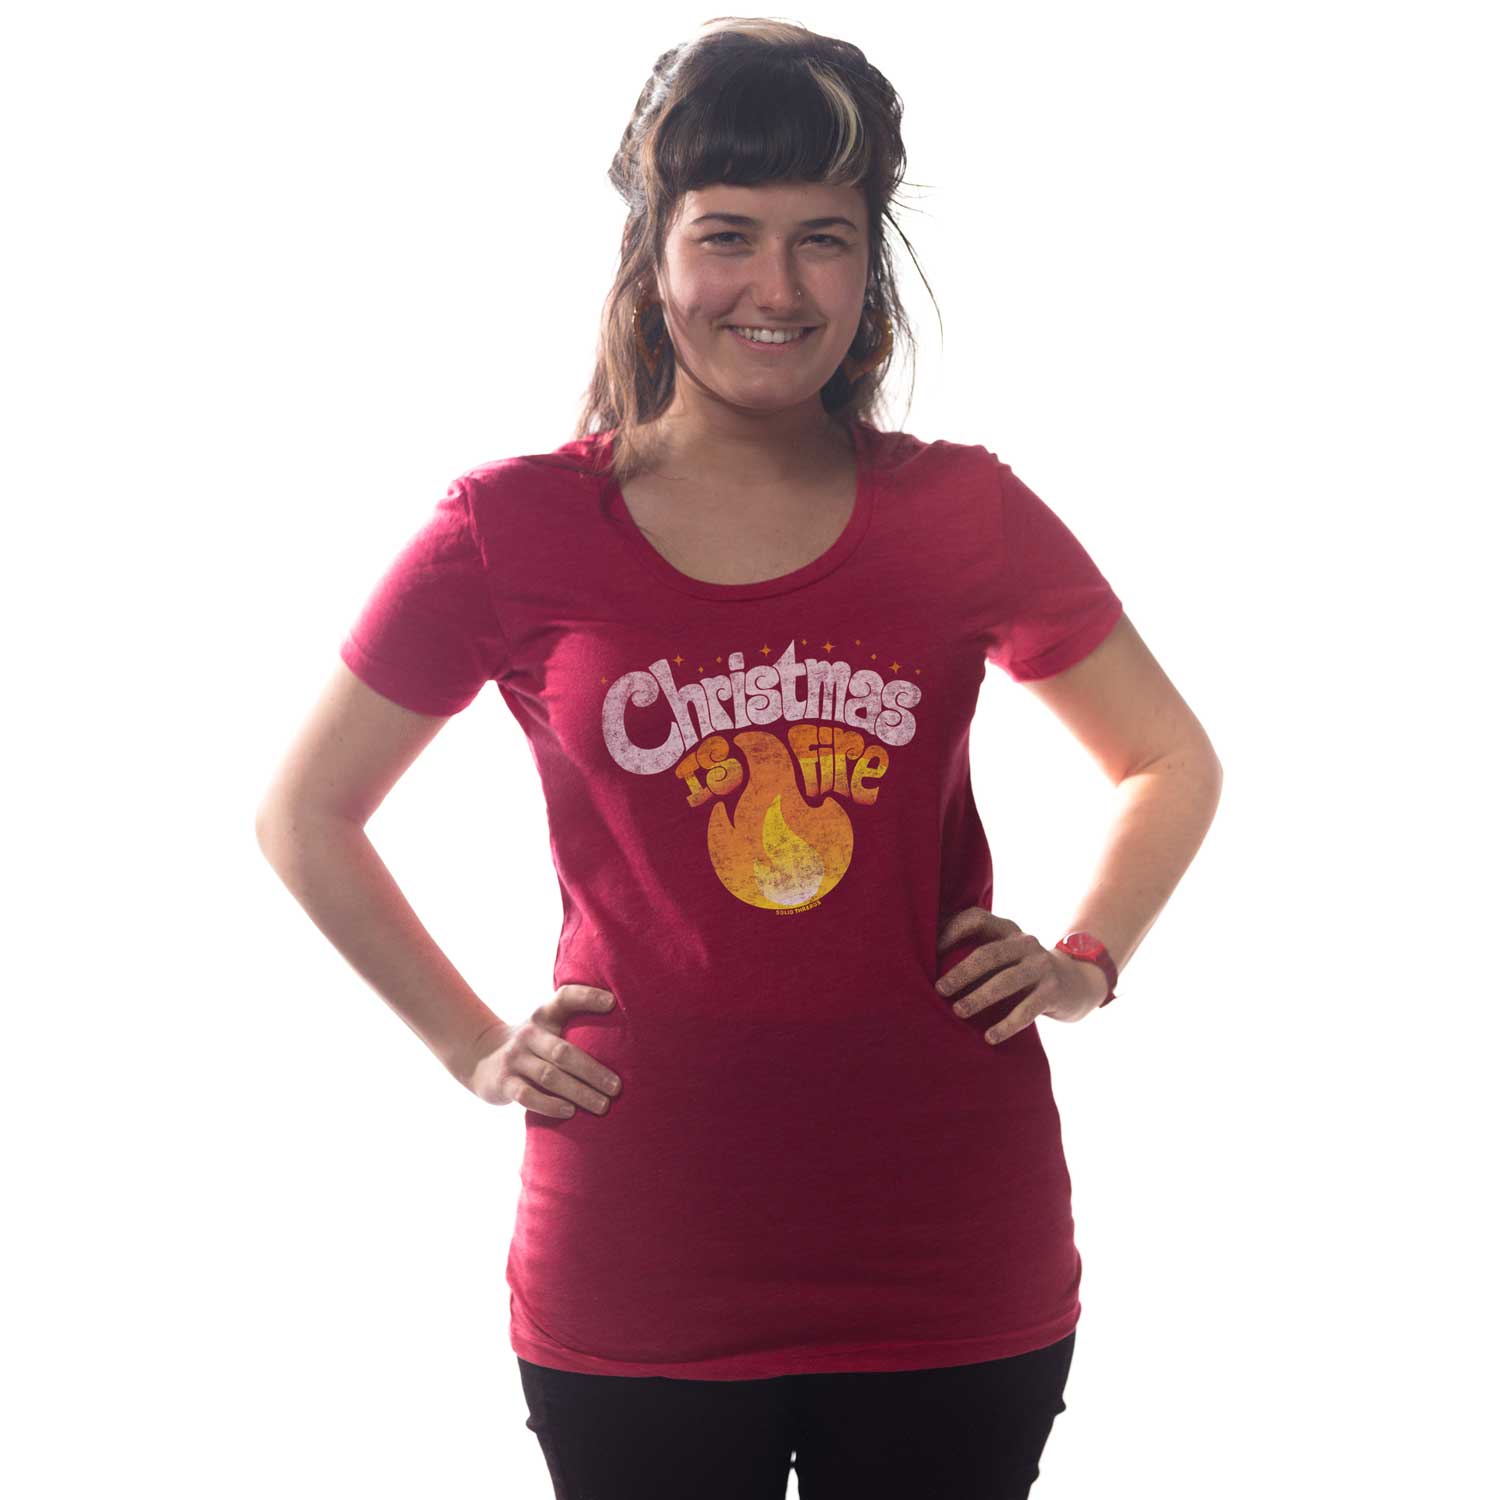 Women's Christmas is Fire Retro Graphic Tee | Funny Holiday Cheer T-Shirt on Model | SOLID THREADS